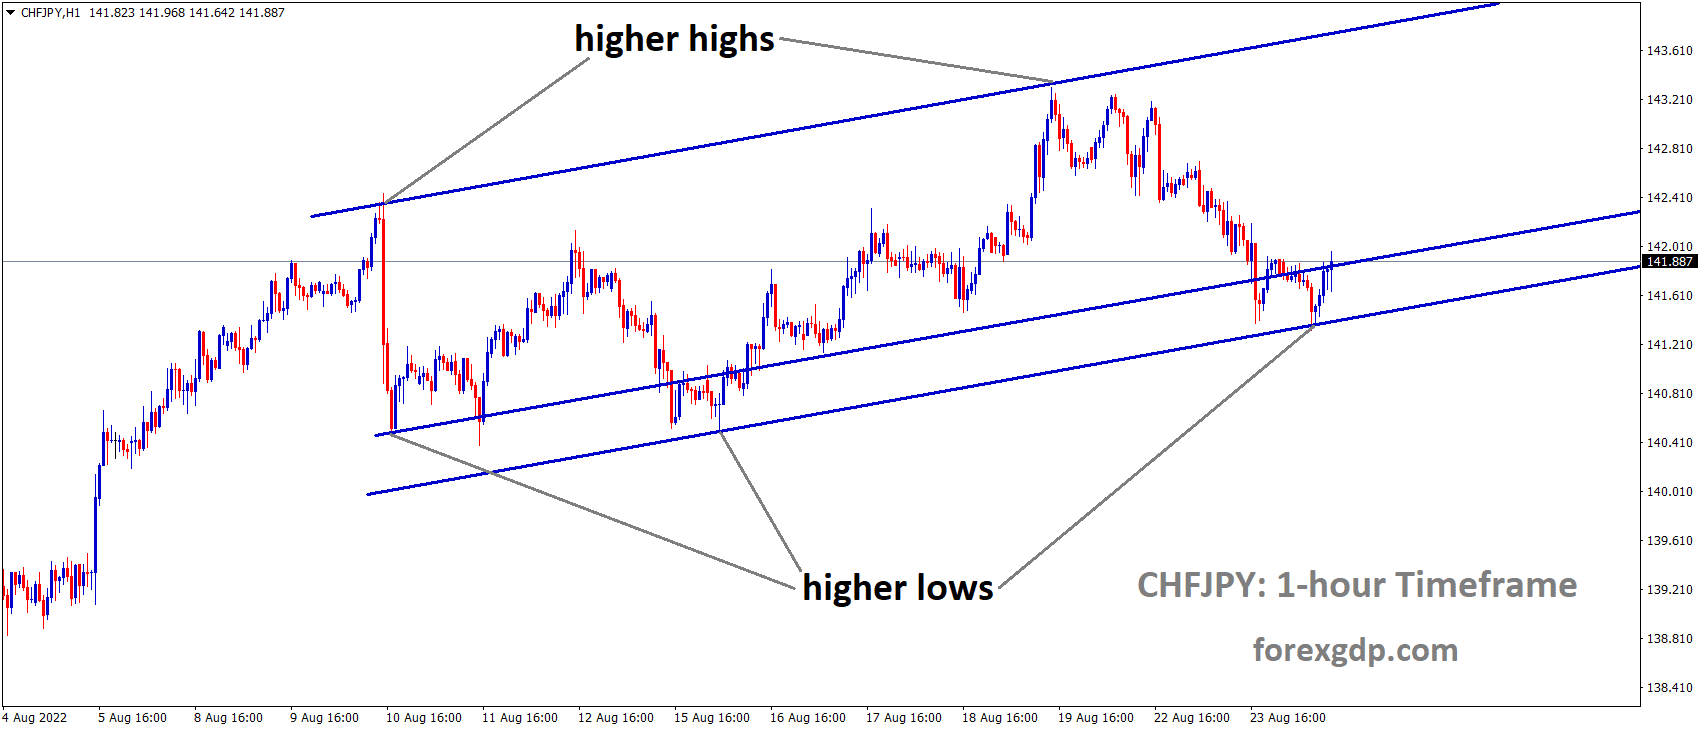 CHFJPY is moving in an Ascending channel and the market has rebounded from the higher low area of the channel